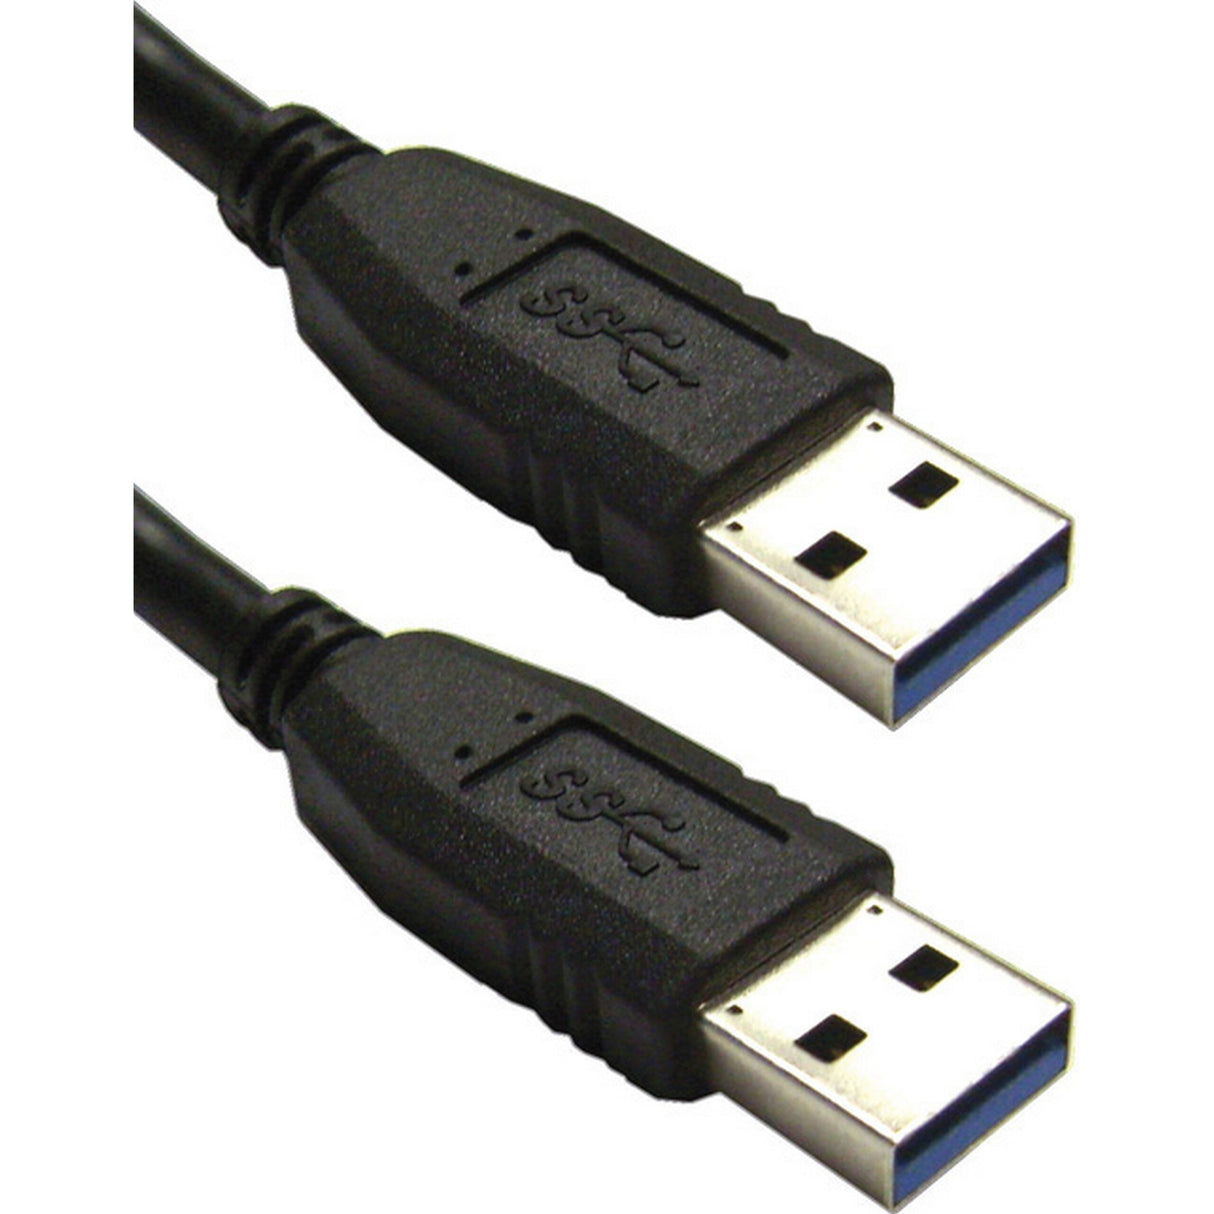 Connectronics USB3-AMM-6 USB 3.0 Cable A Male to A Male, 6-Foot